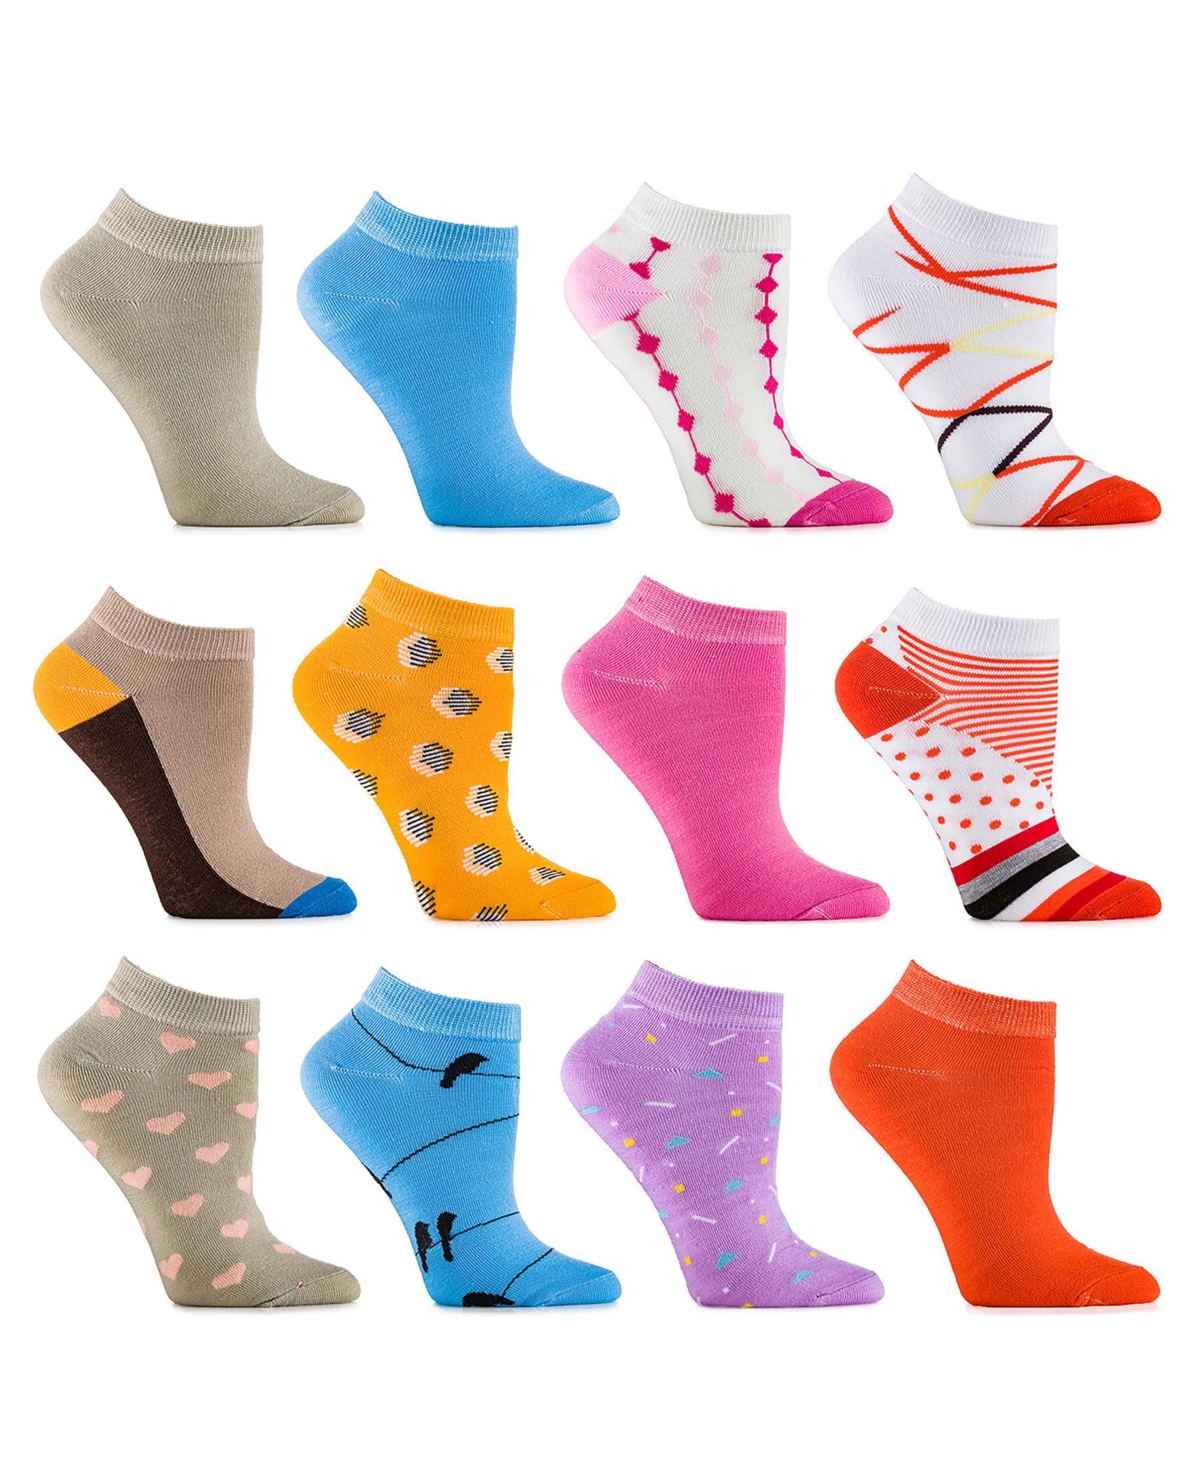 Womens Multicolor Ankle Socks 12 Pack - Multicolor motley